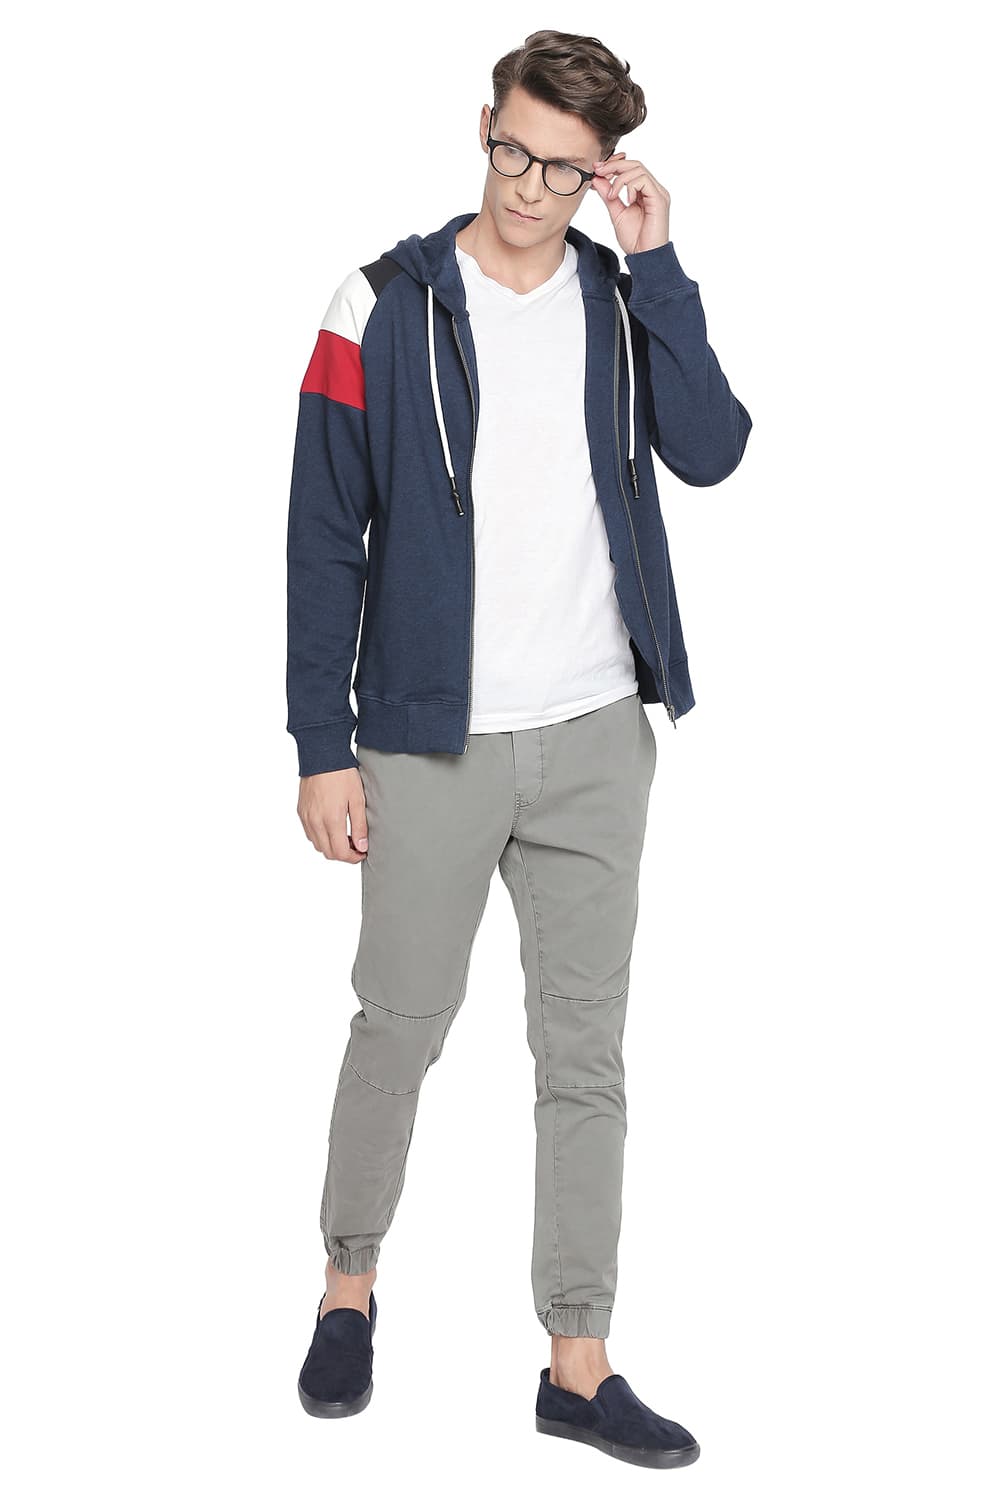 BASICS MUSCLE FIT COLOR BLOCK HOODED KNIT JACKET